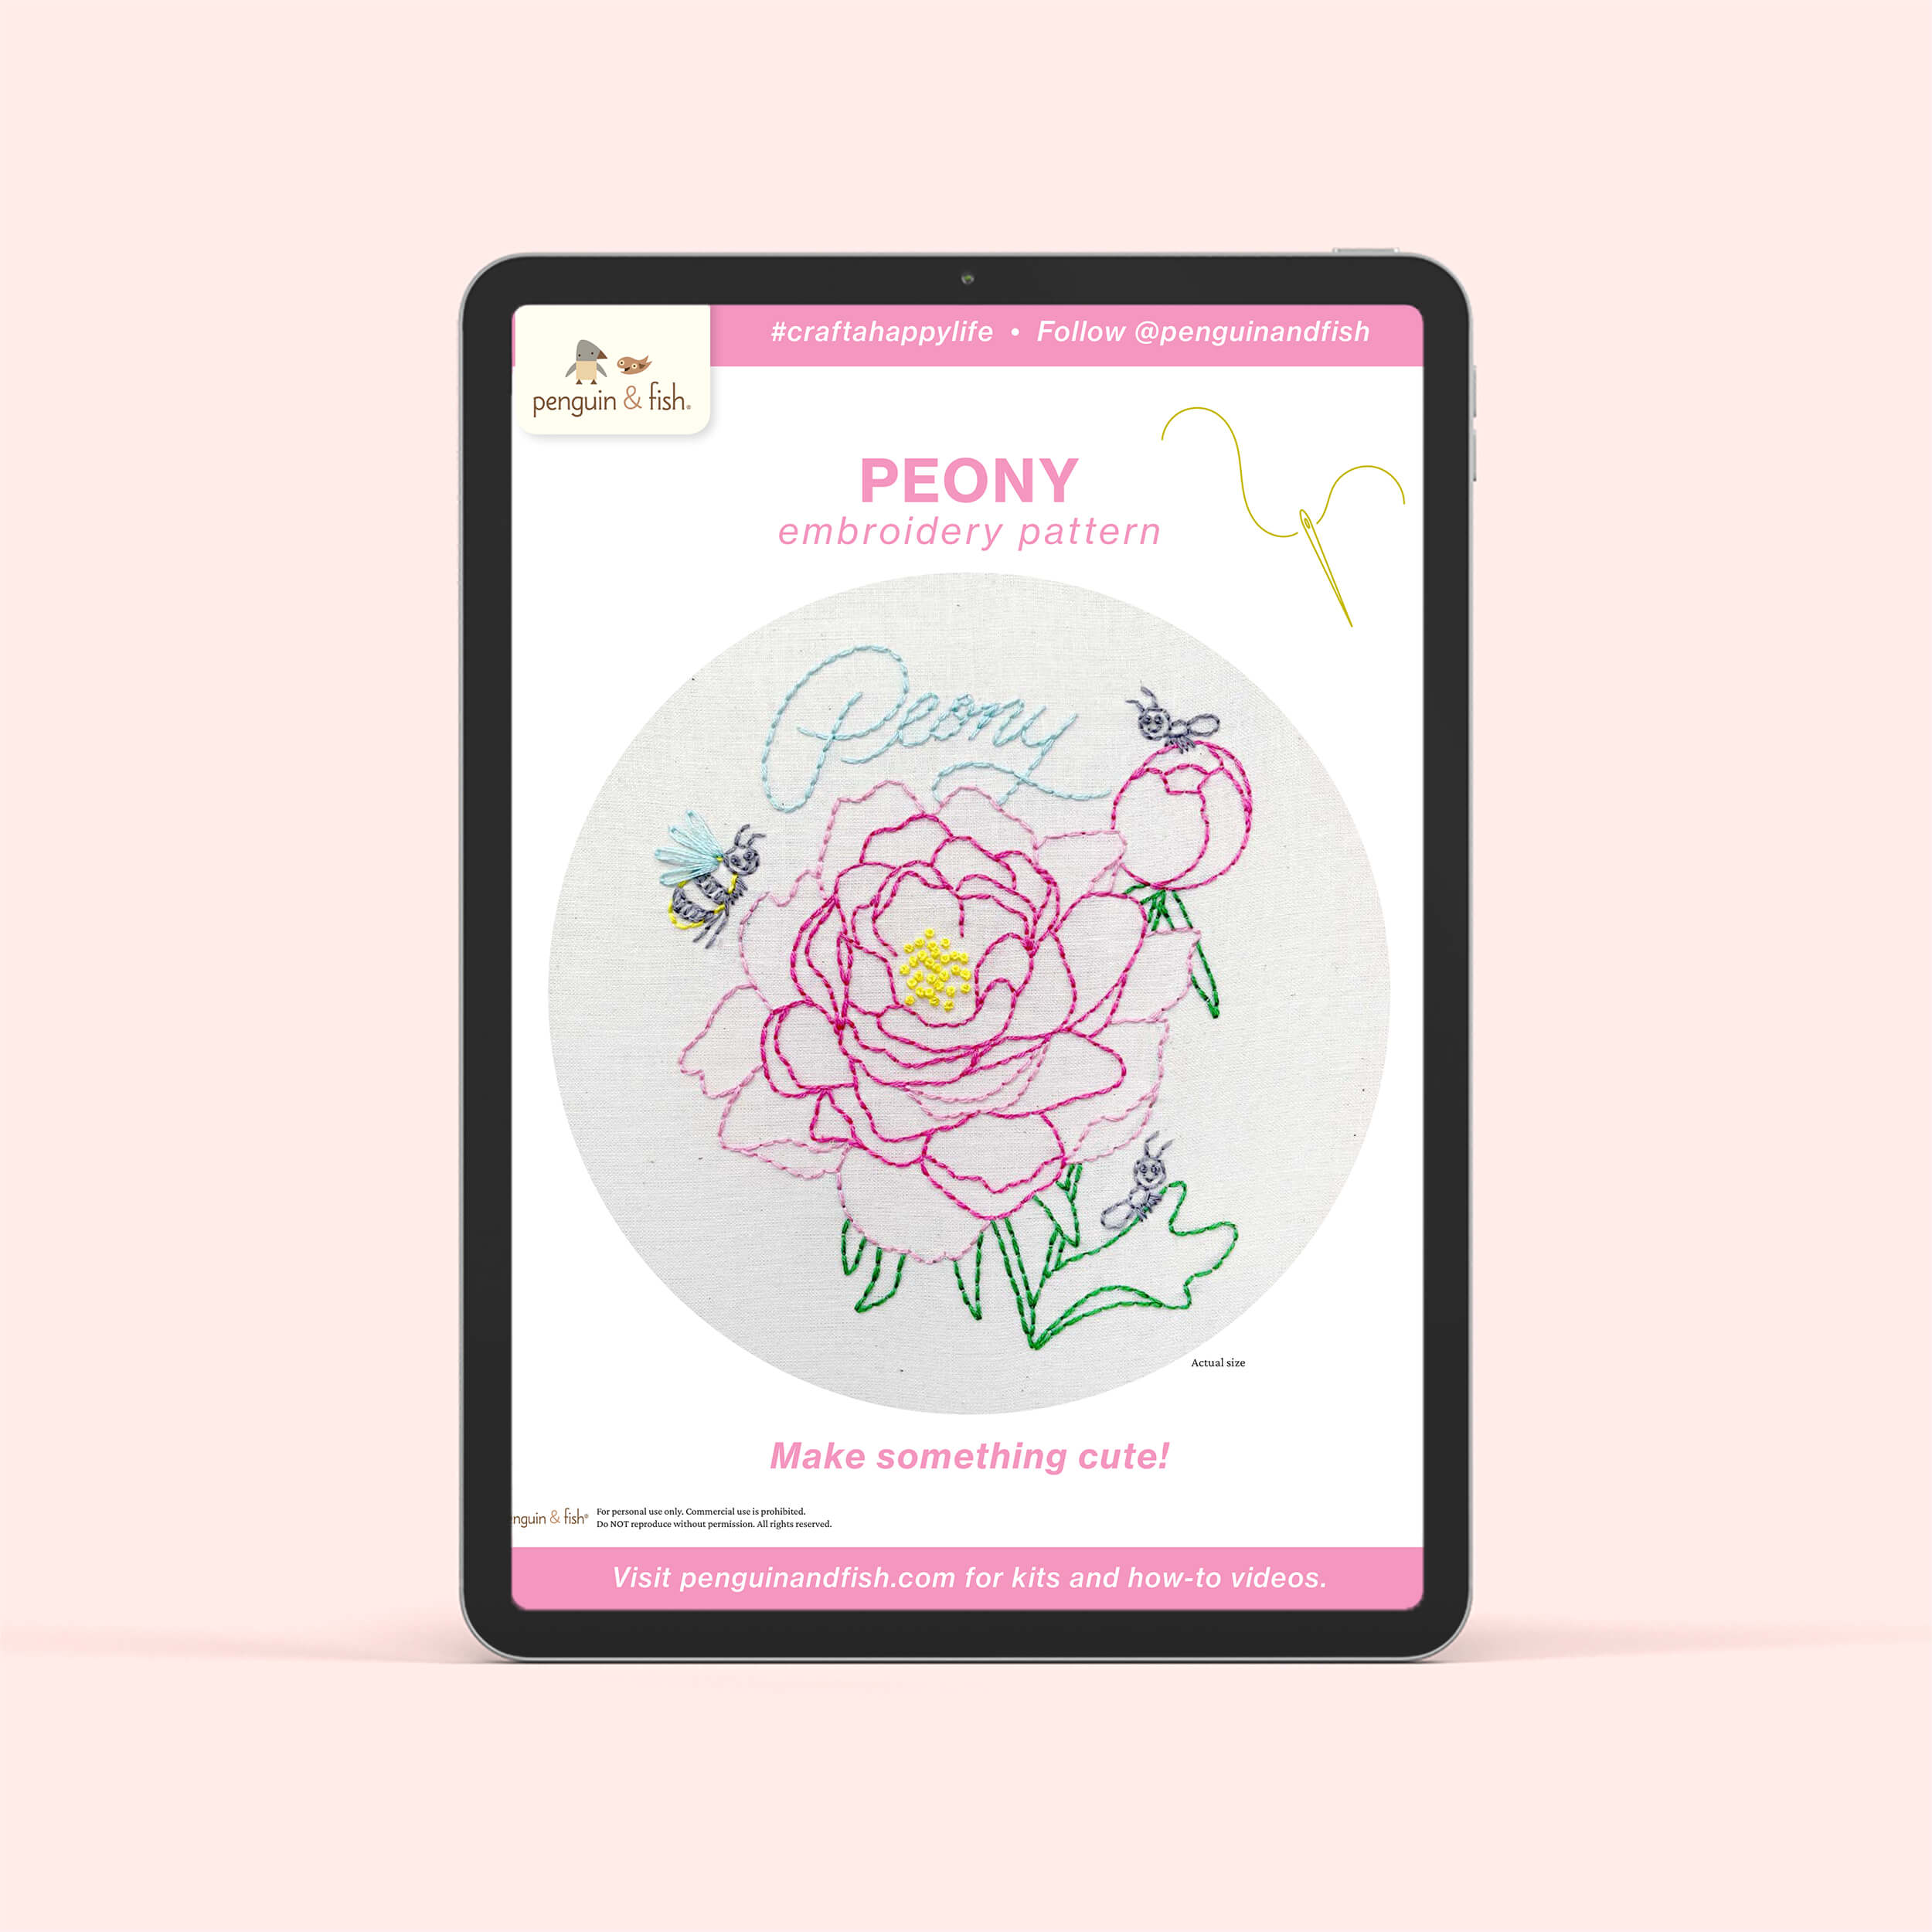 Peony PDF embroidery pattern shown on a tablet